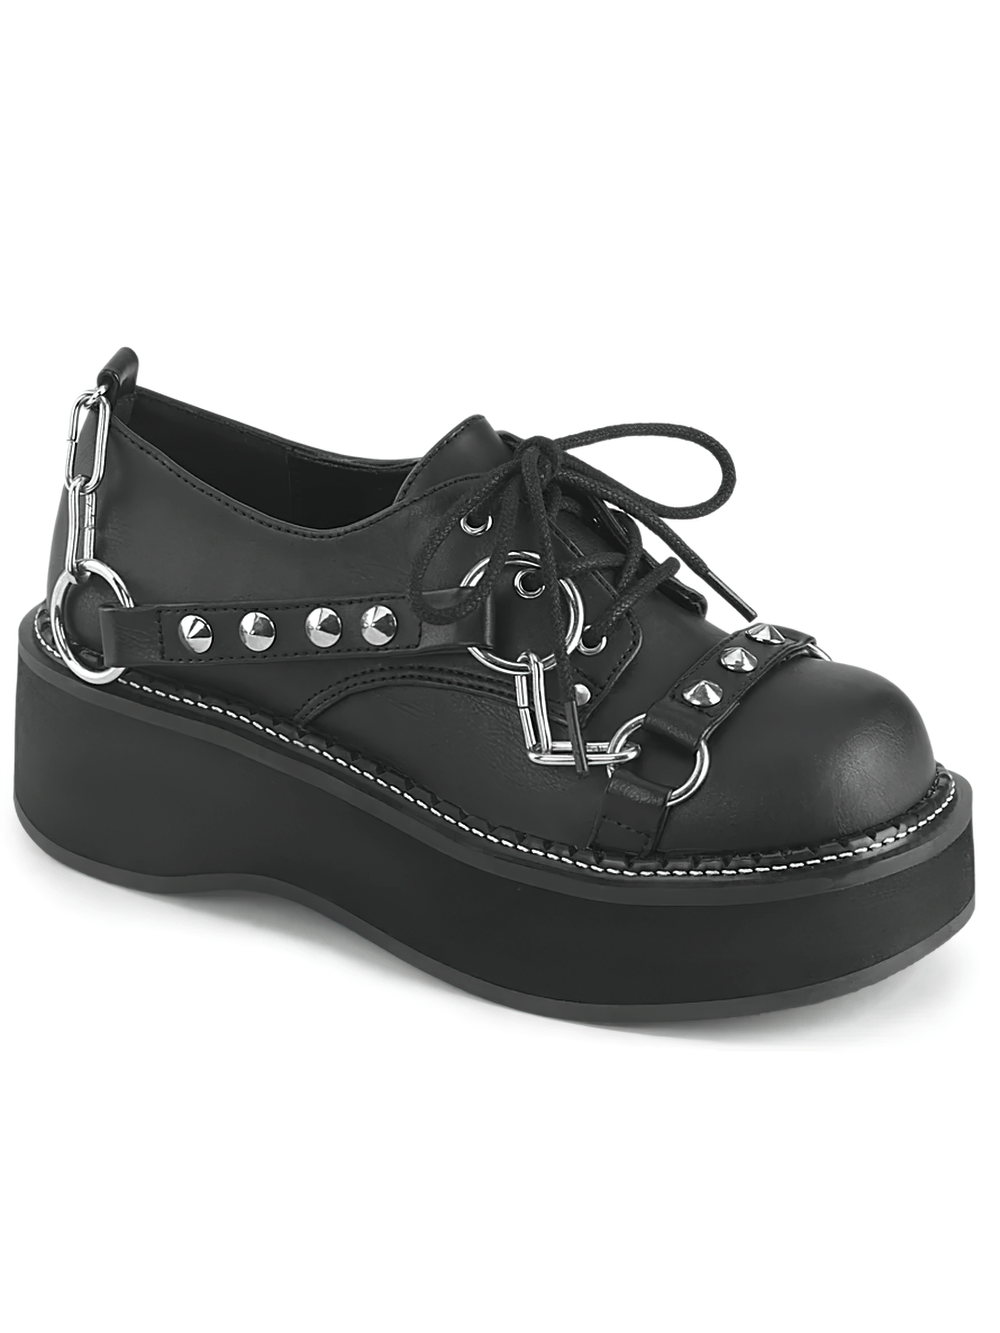 DEMONIA Studded Strap Platform Shoes with Lace-Up